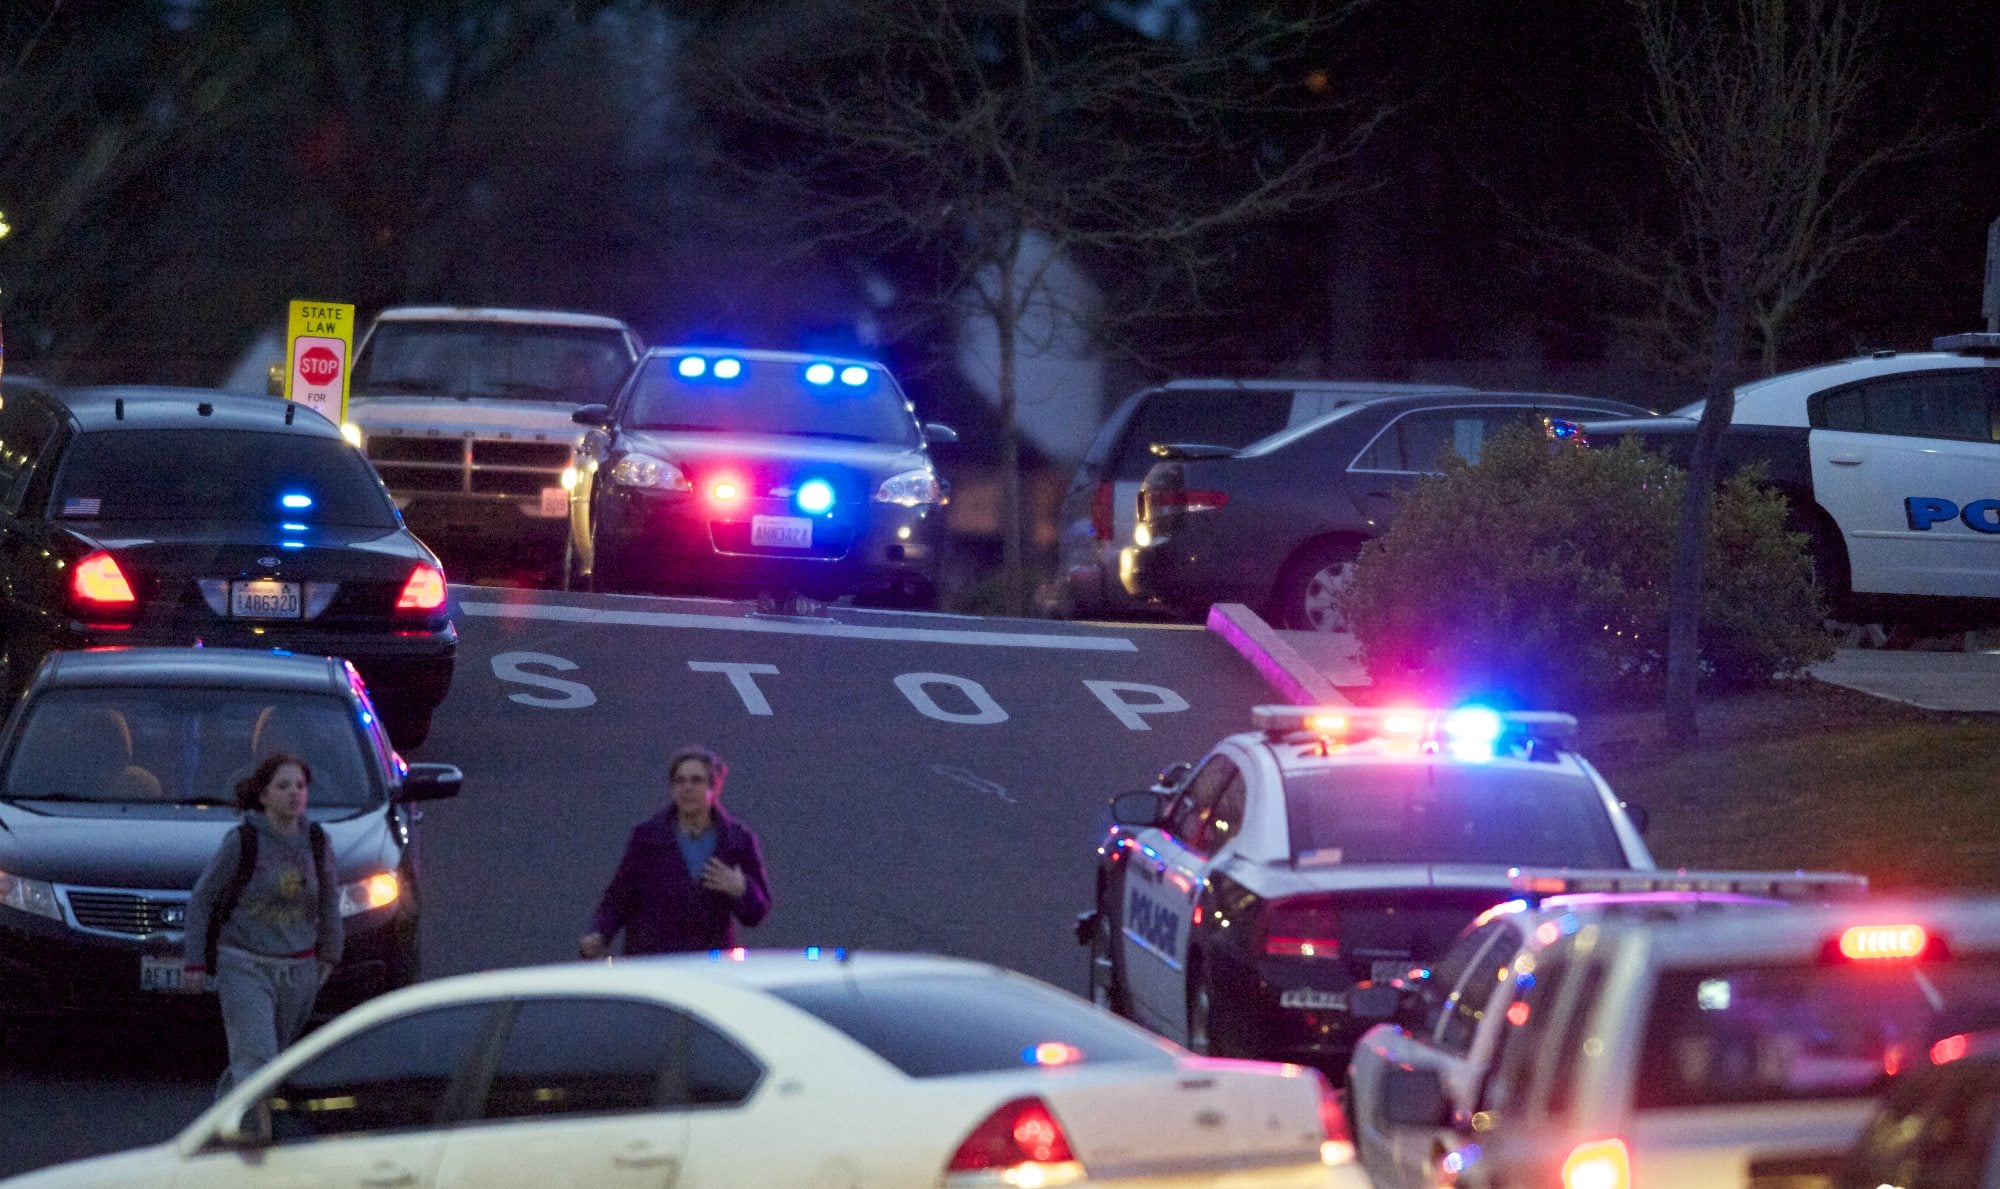 People are evacuated from the Center for Community Health after reports of shots fired on Feb. 4, 2014, at the Vancouver VA campus. A man shot in the incident is suing the county.